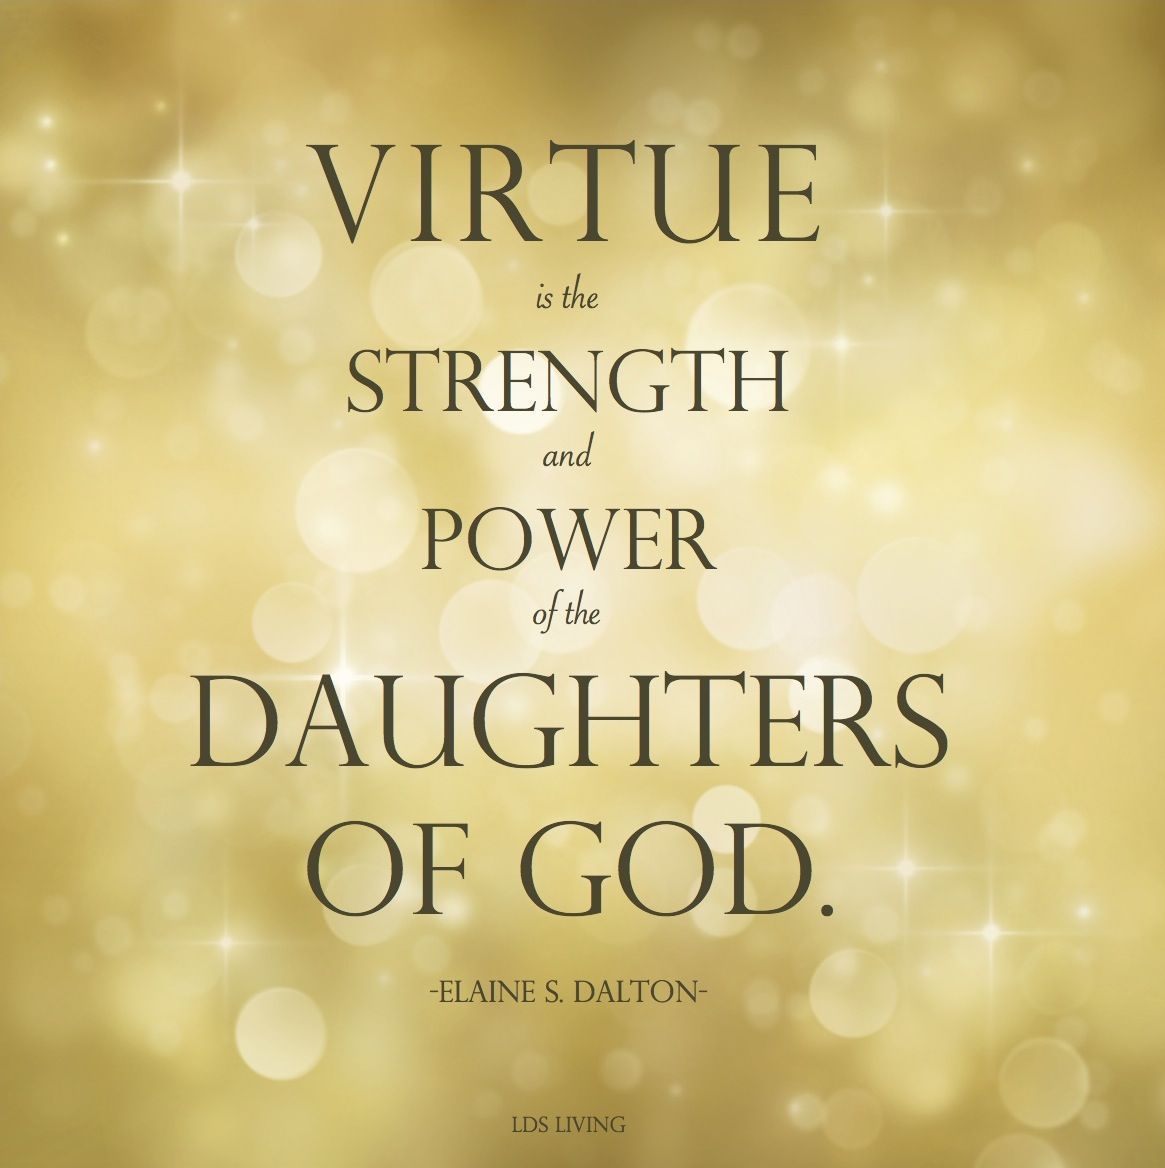 “Virtue is the strength and power of the daughters of God.” -Elaine S. Dalton